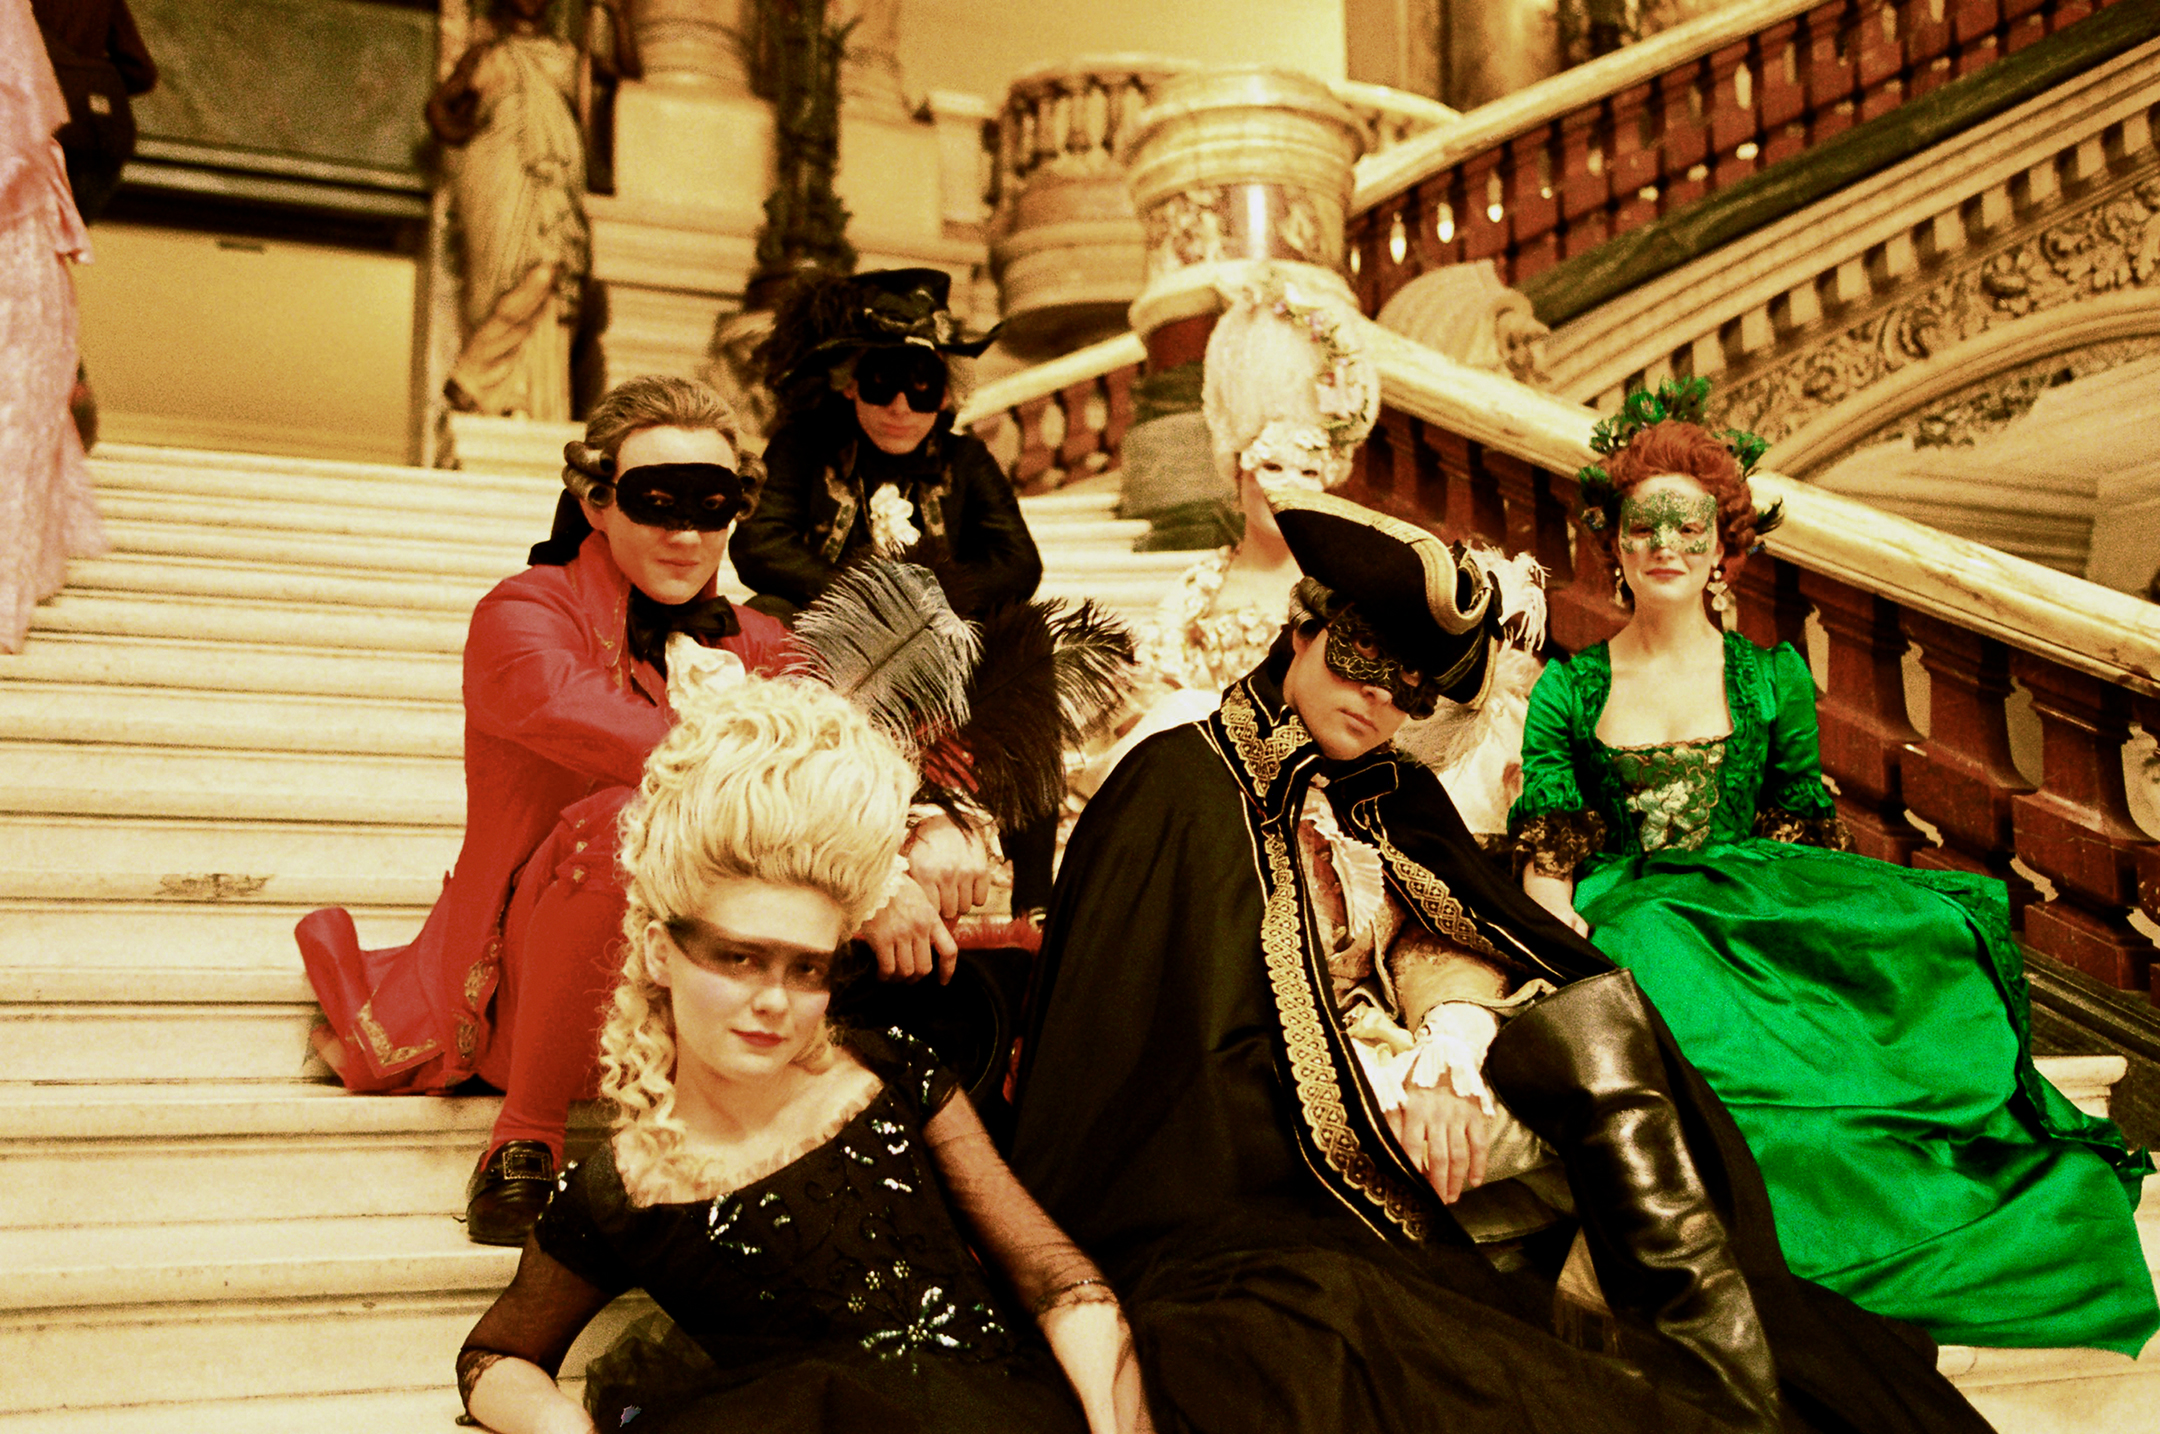 Still from the movie Marie Antoinette showing the cast lounging on palace steps at a costume ball